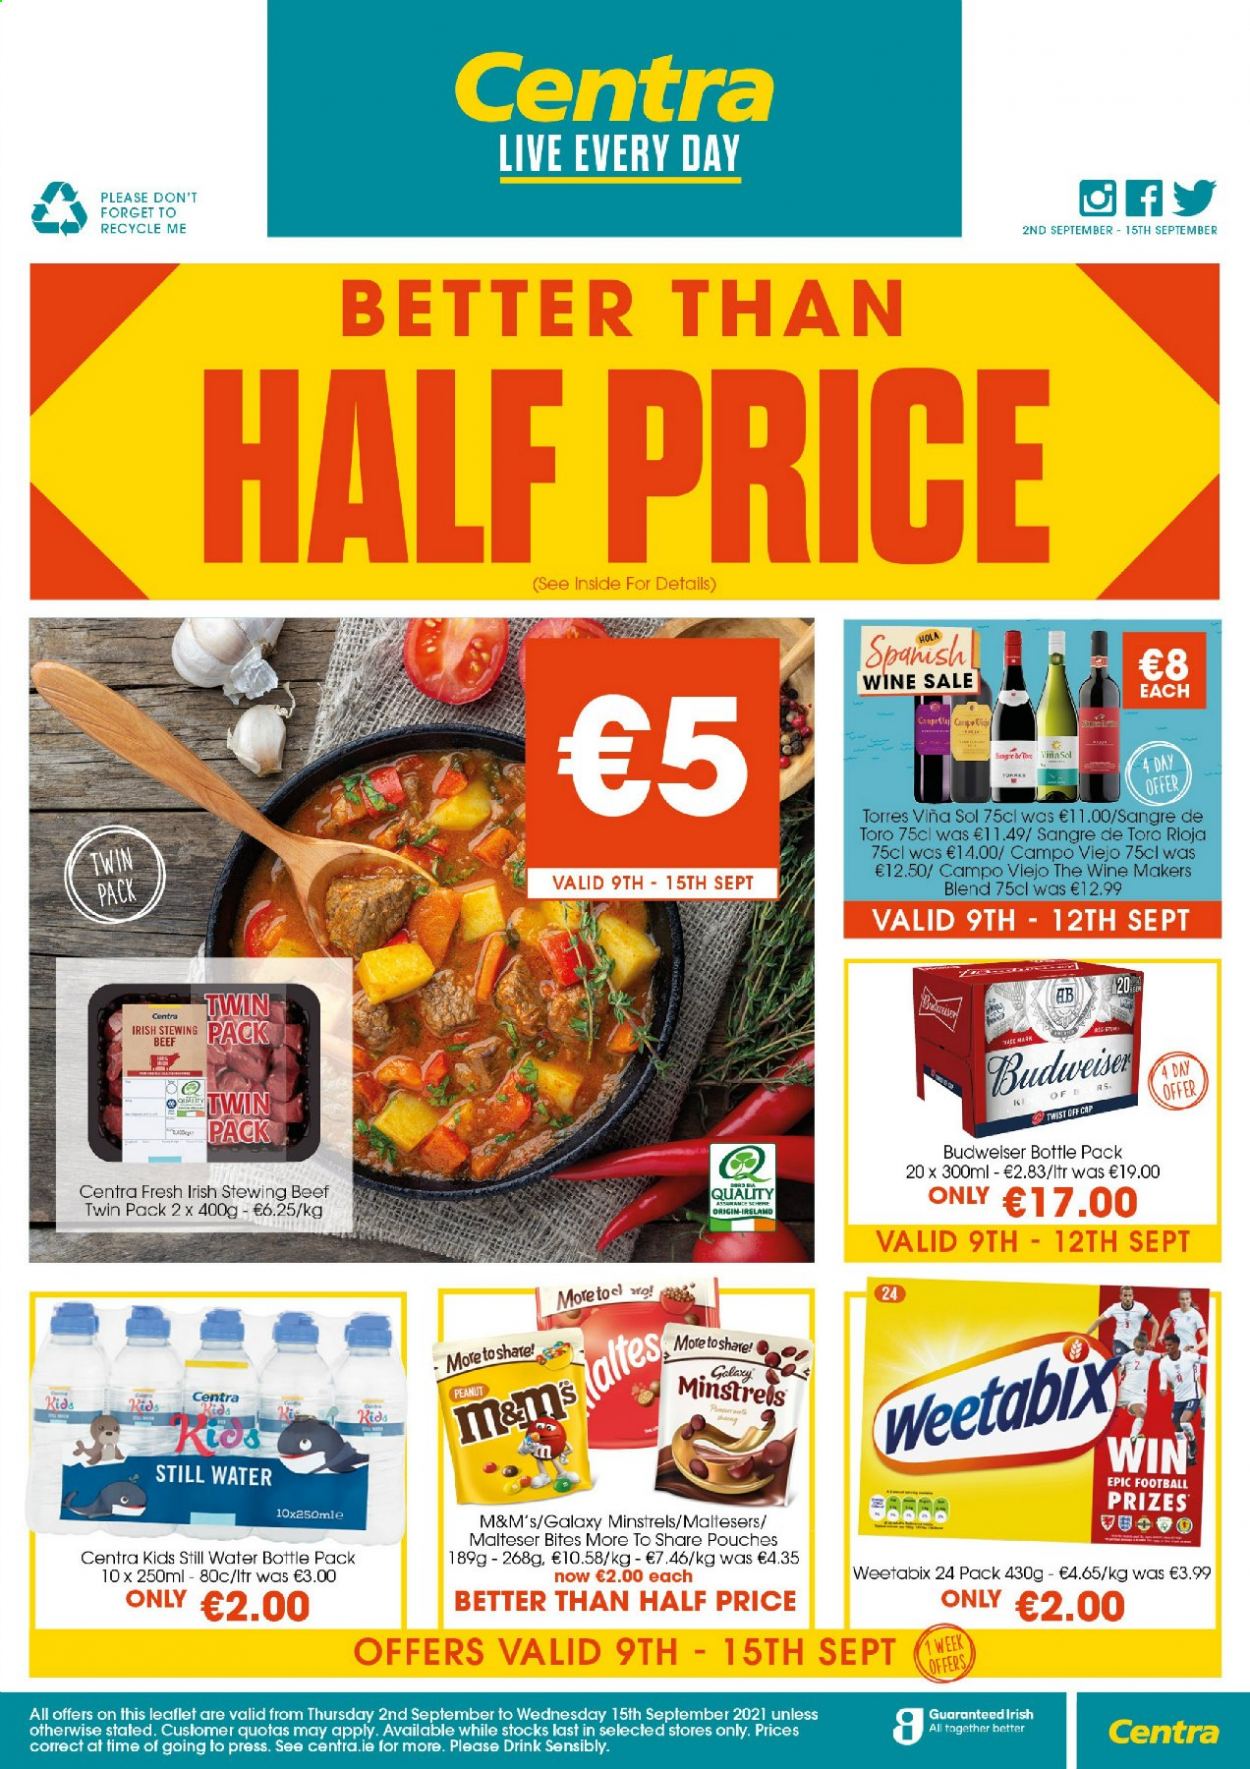 thumbnail - Centra offer  - 02.09.2021 - 15.09.2021 - Sales products - M&M's, Maltesers, Weetabix, mineral water, bottled water, red wine, wine, Campo Viejo, beer, Sol, beef meat, stewing beef, drink bottle, Budweiser. Page 4.